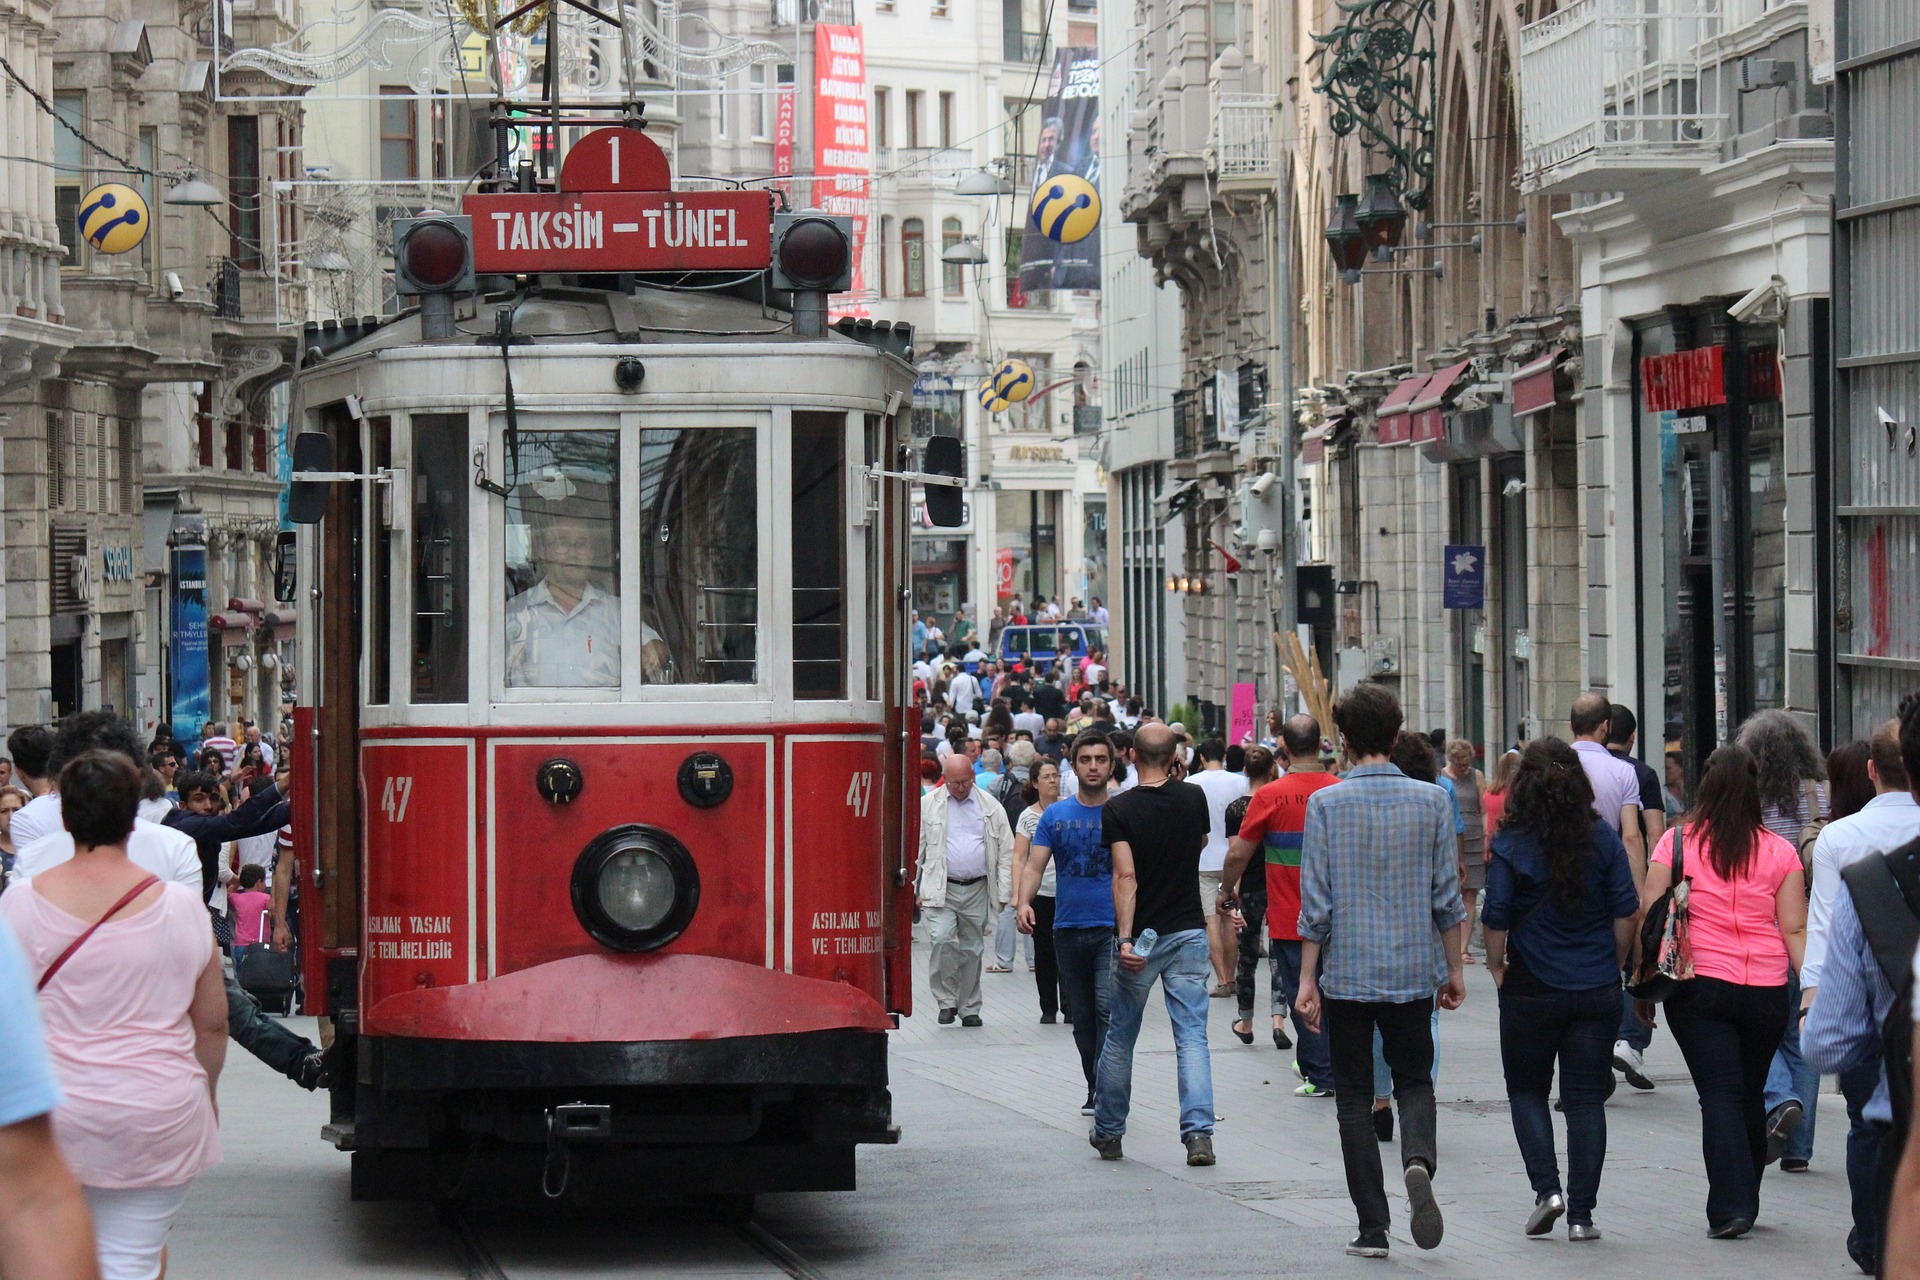 Thumbnail for How Do I Go To The Taksim Square?